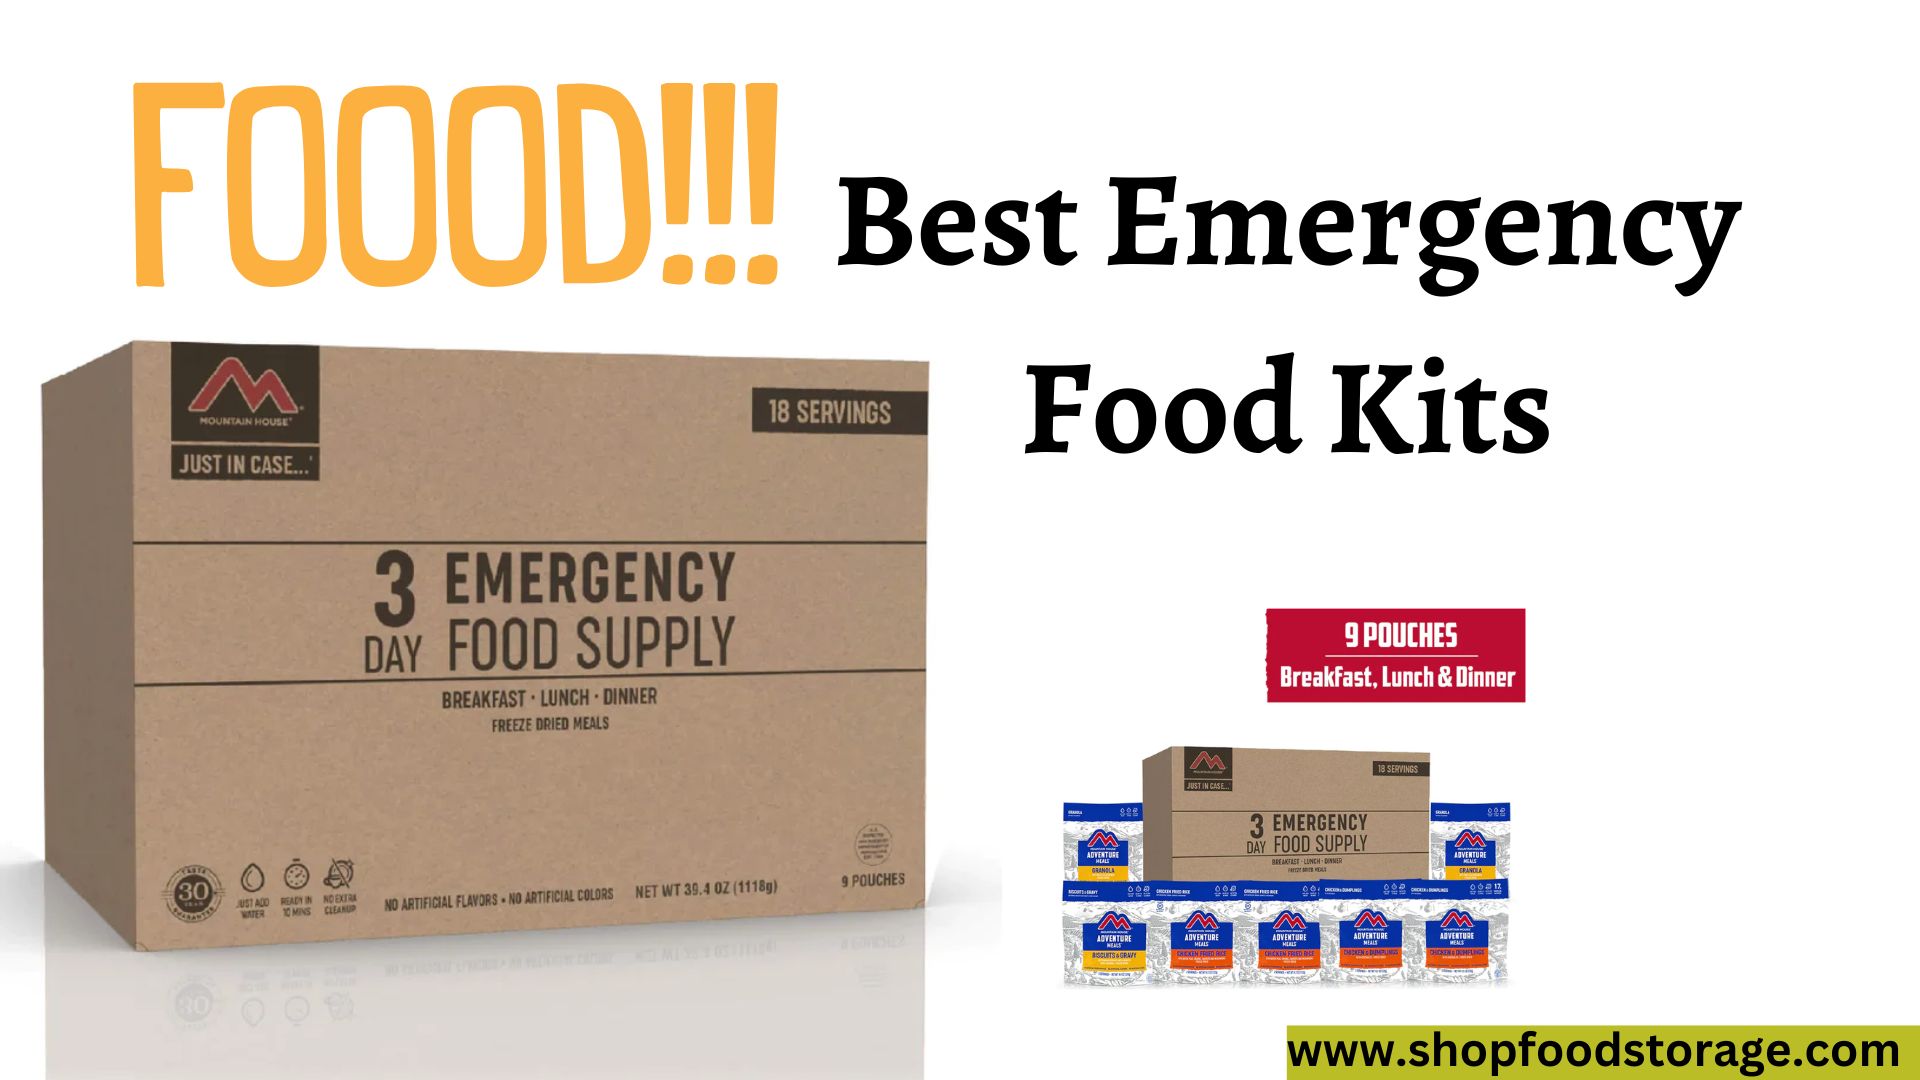 Shop Food Storage is based out of Henderson, Nevada and is family owned and operated. Our mission is to provide you and your family with high quality food storage and survival products at the best possible price!